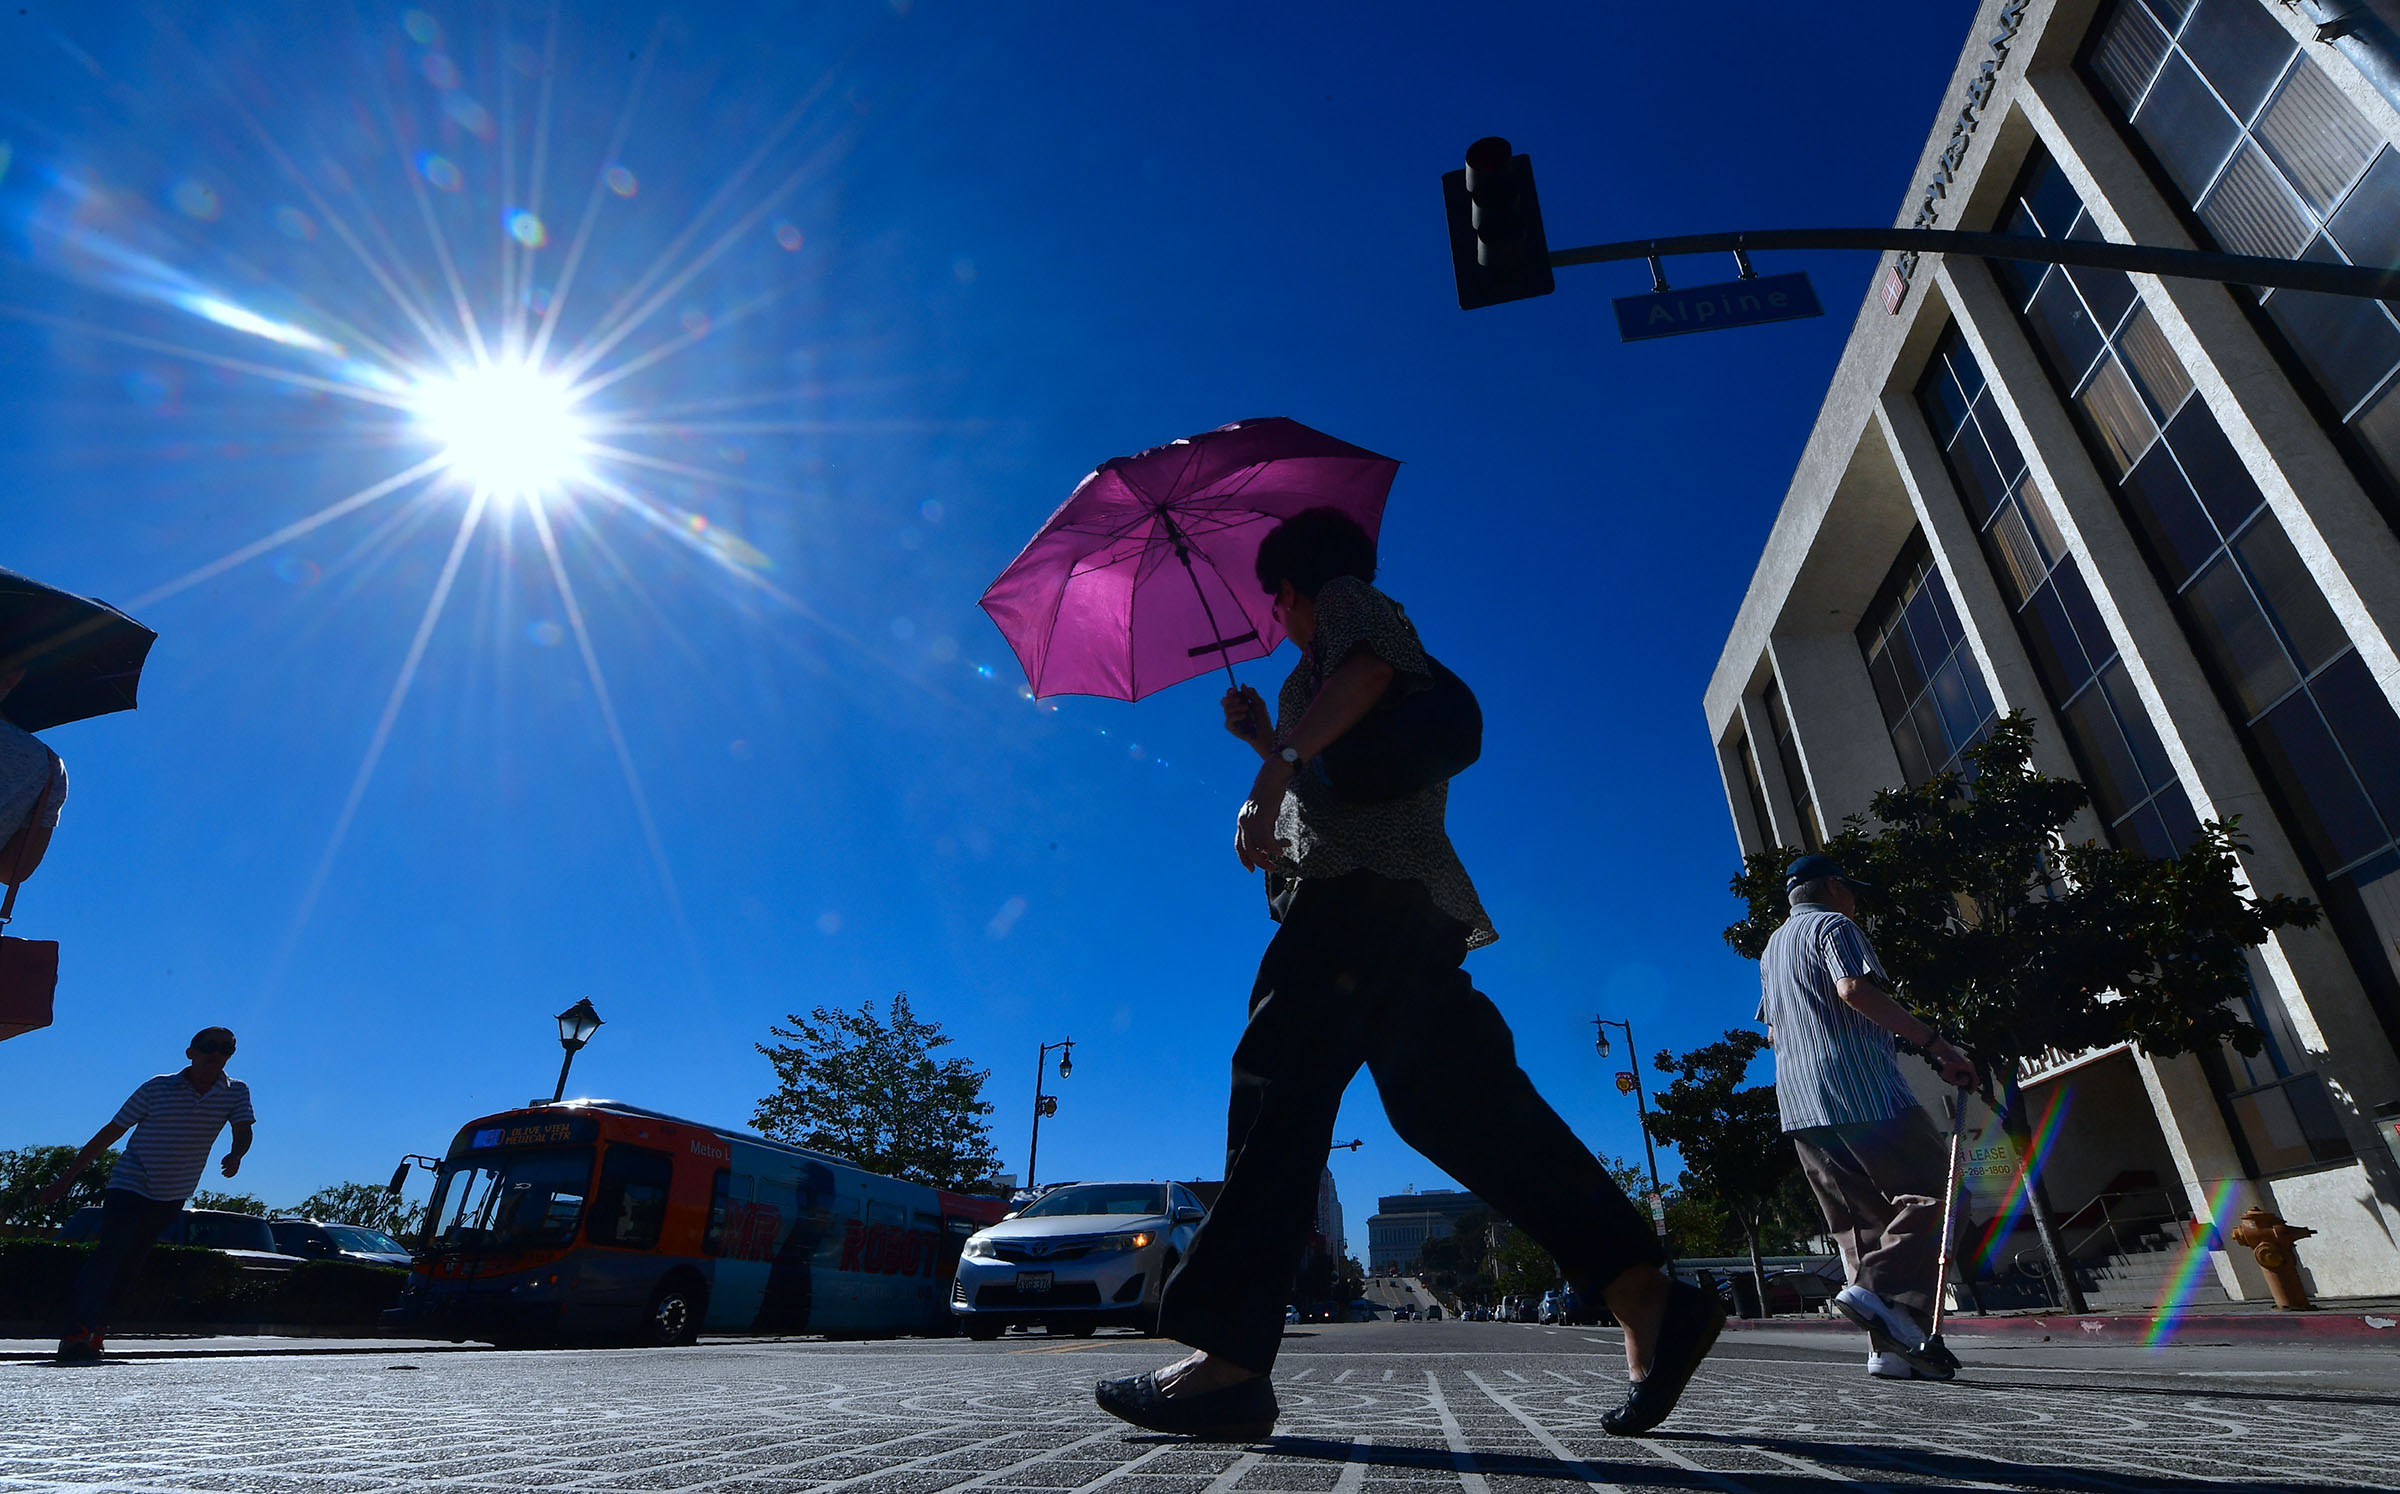 A pedestrian uses an umbrella on a hot sunny morning in Los Angeles on October 24, 2017 amid a late season heatwave hitting southern California. (Frederic J. Brown—AFP/Getty Images)